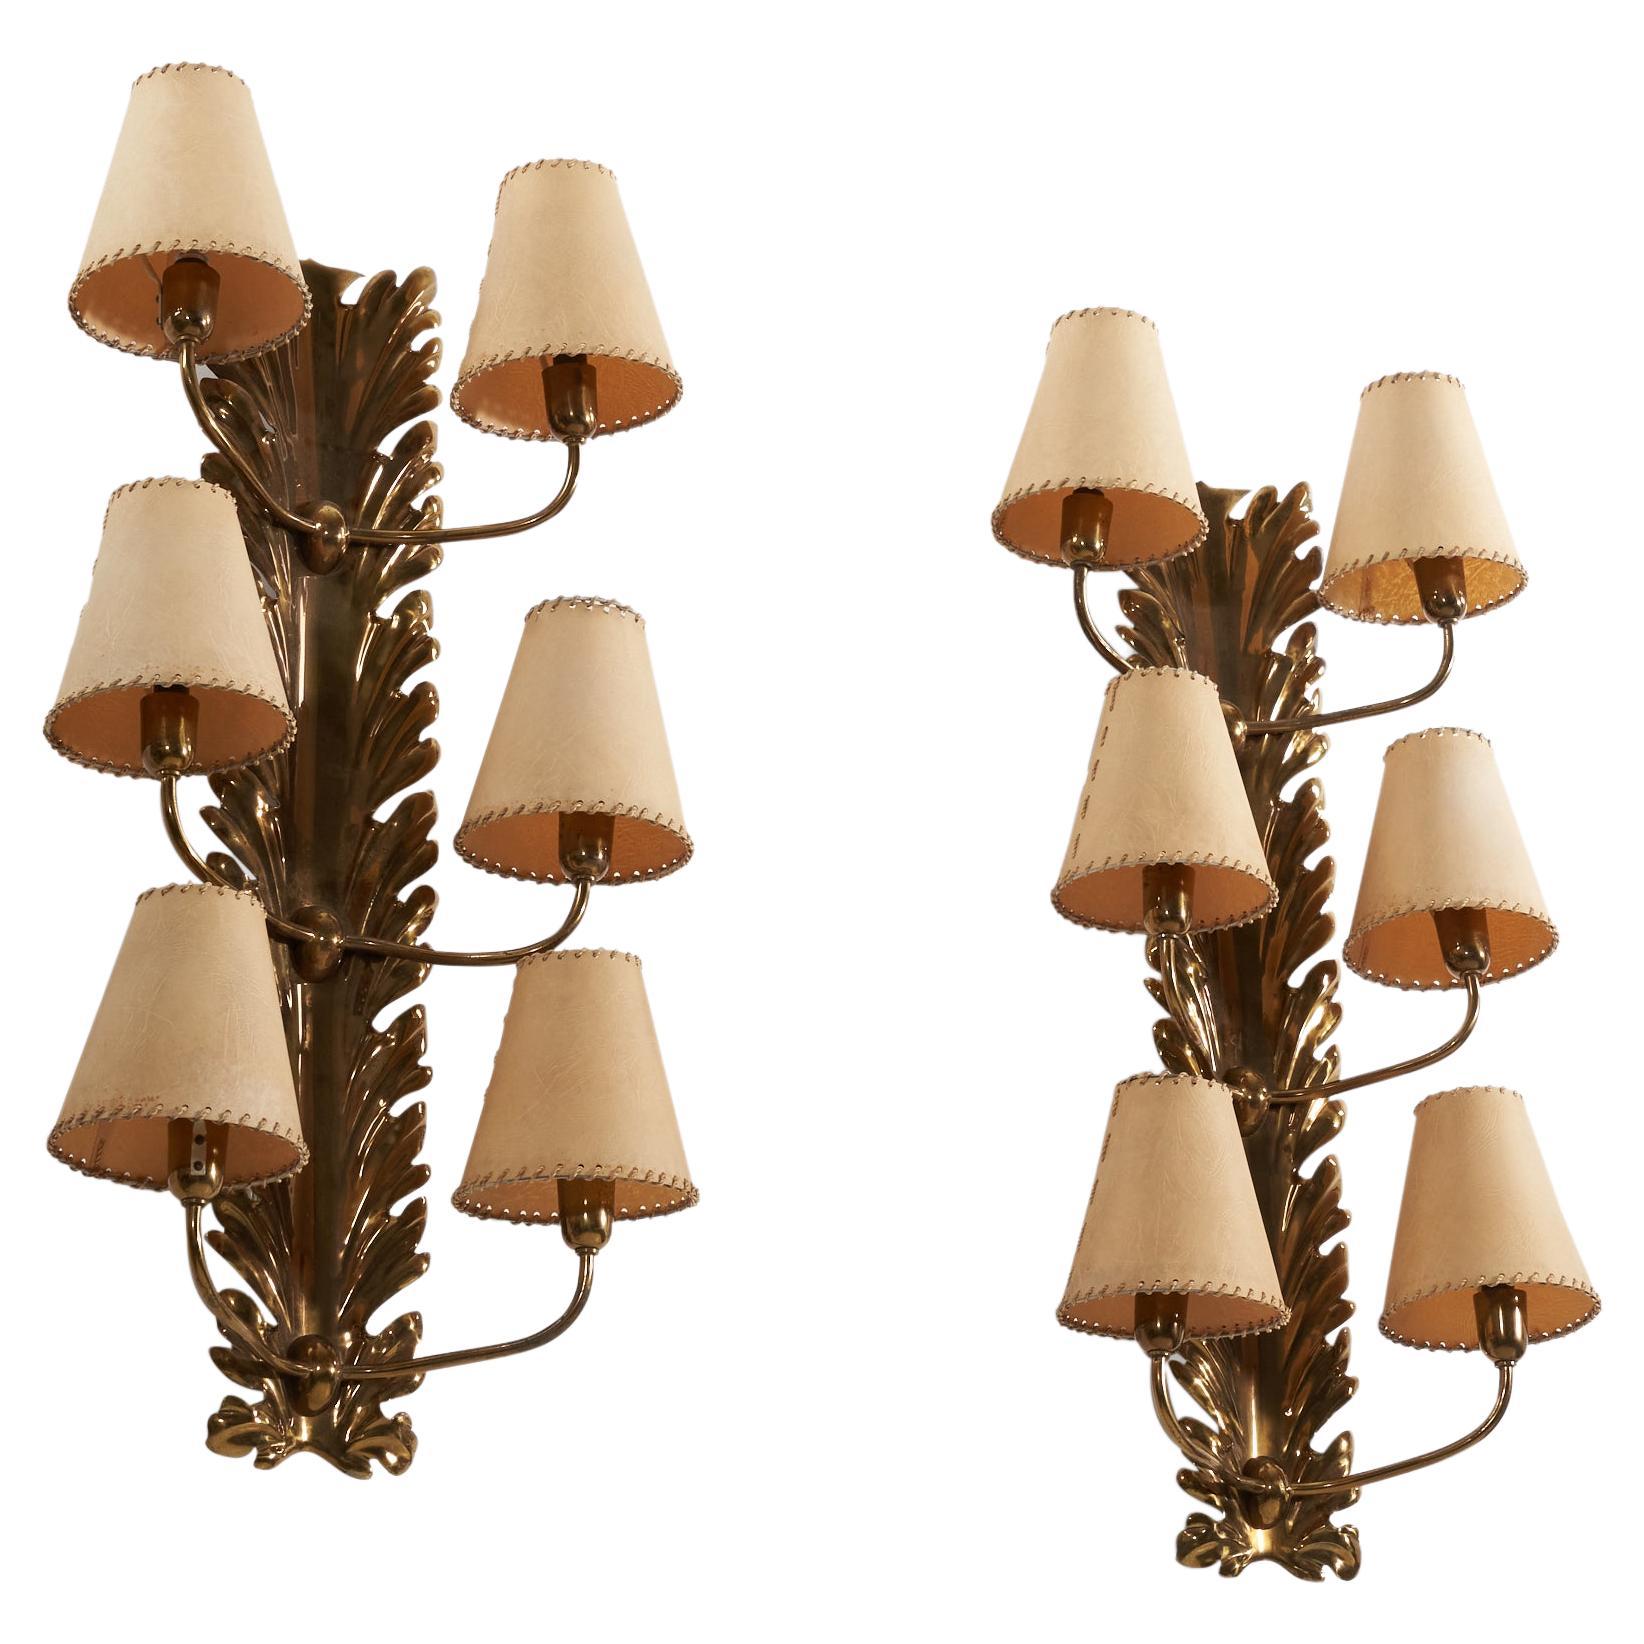 A pair of sizable six-armed, brass wall lights with parchment paper lampshades, designed by Pietro Chiesa for Fontana Arte, Italy, 1940s. 

Shade dimensions : 2.5